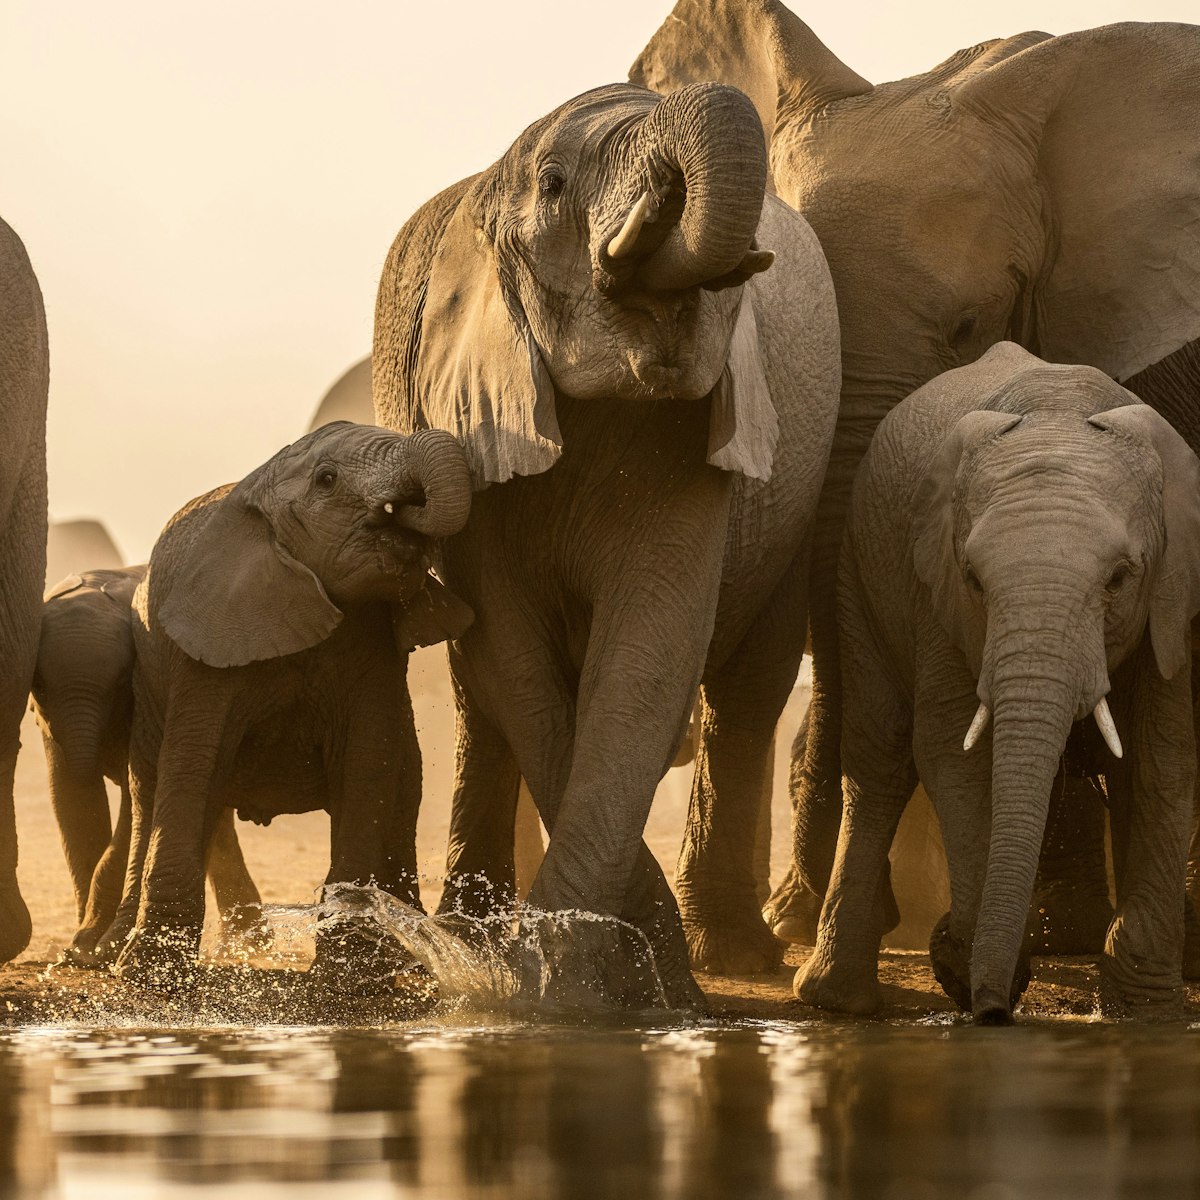 A herd of elephants in the Madikwe Game Reserve, South Africa.